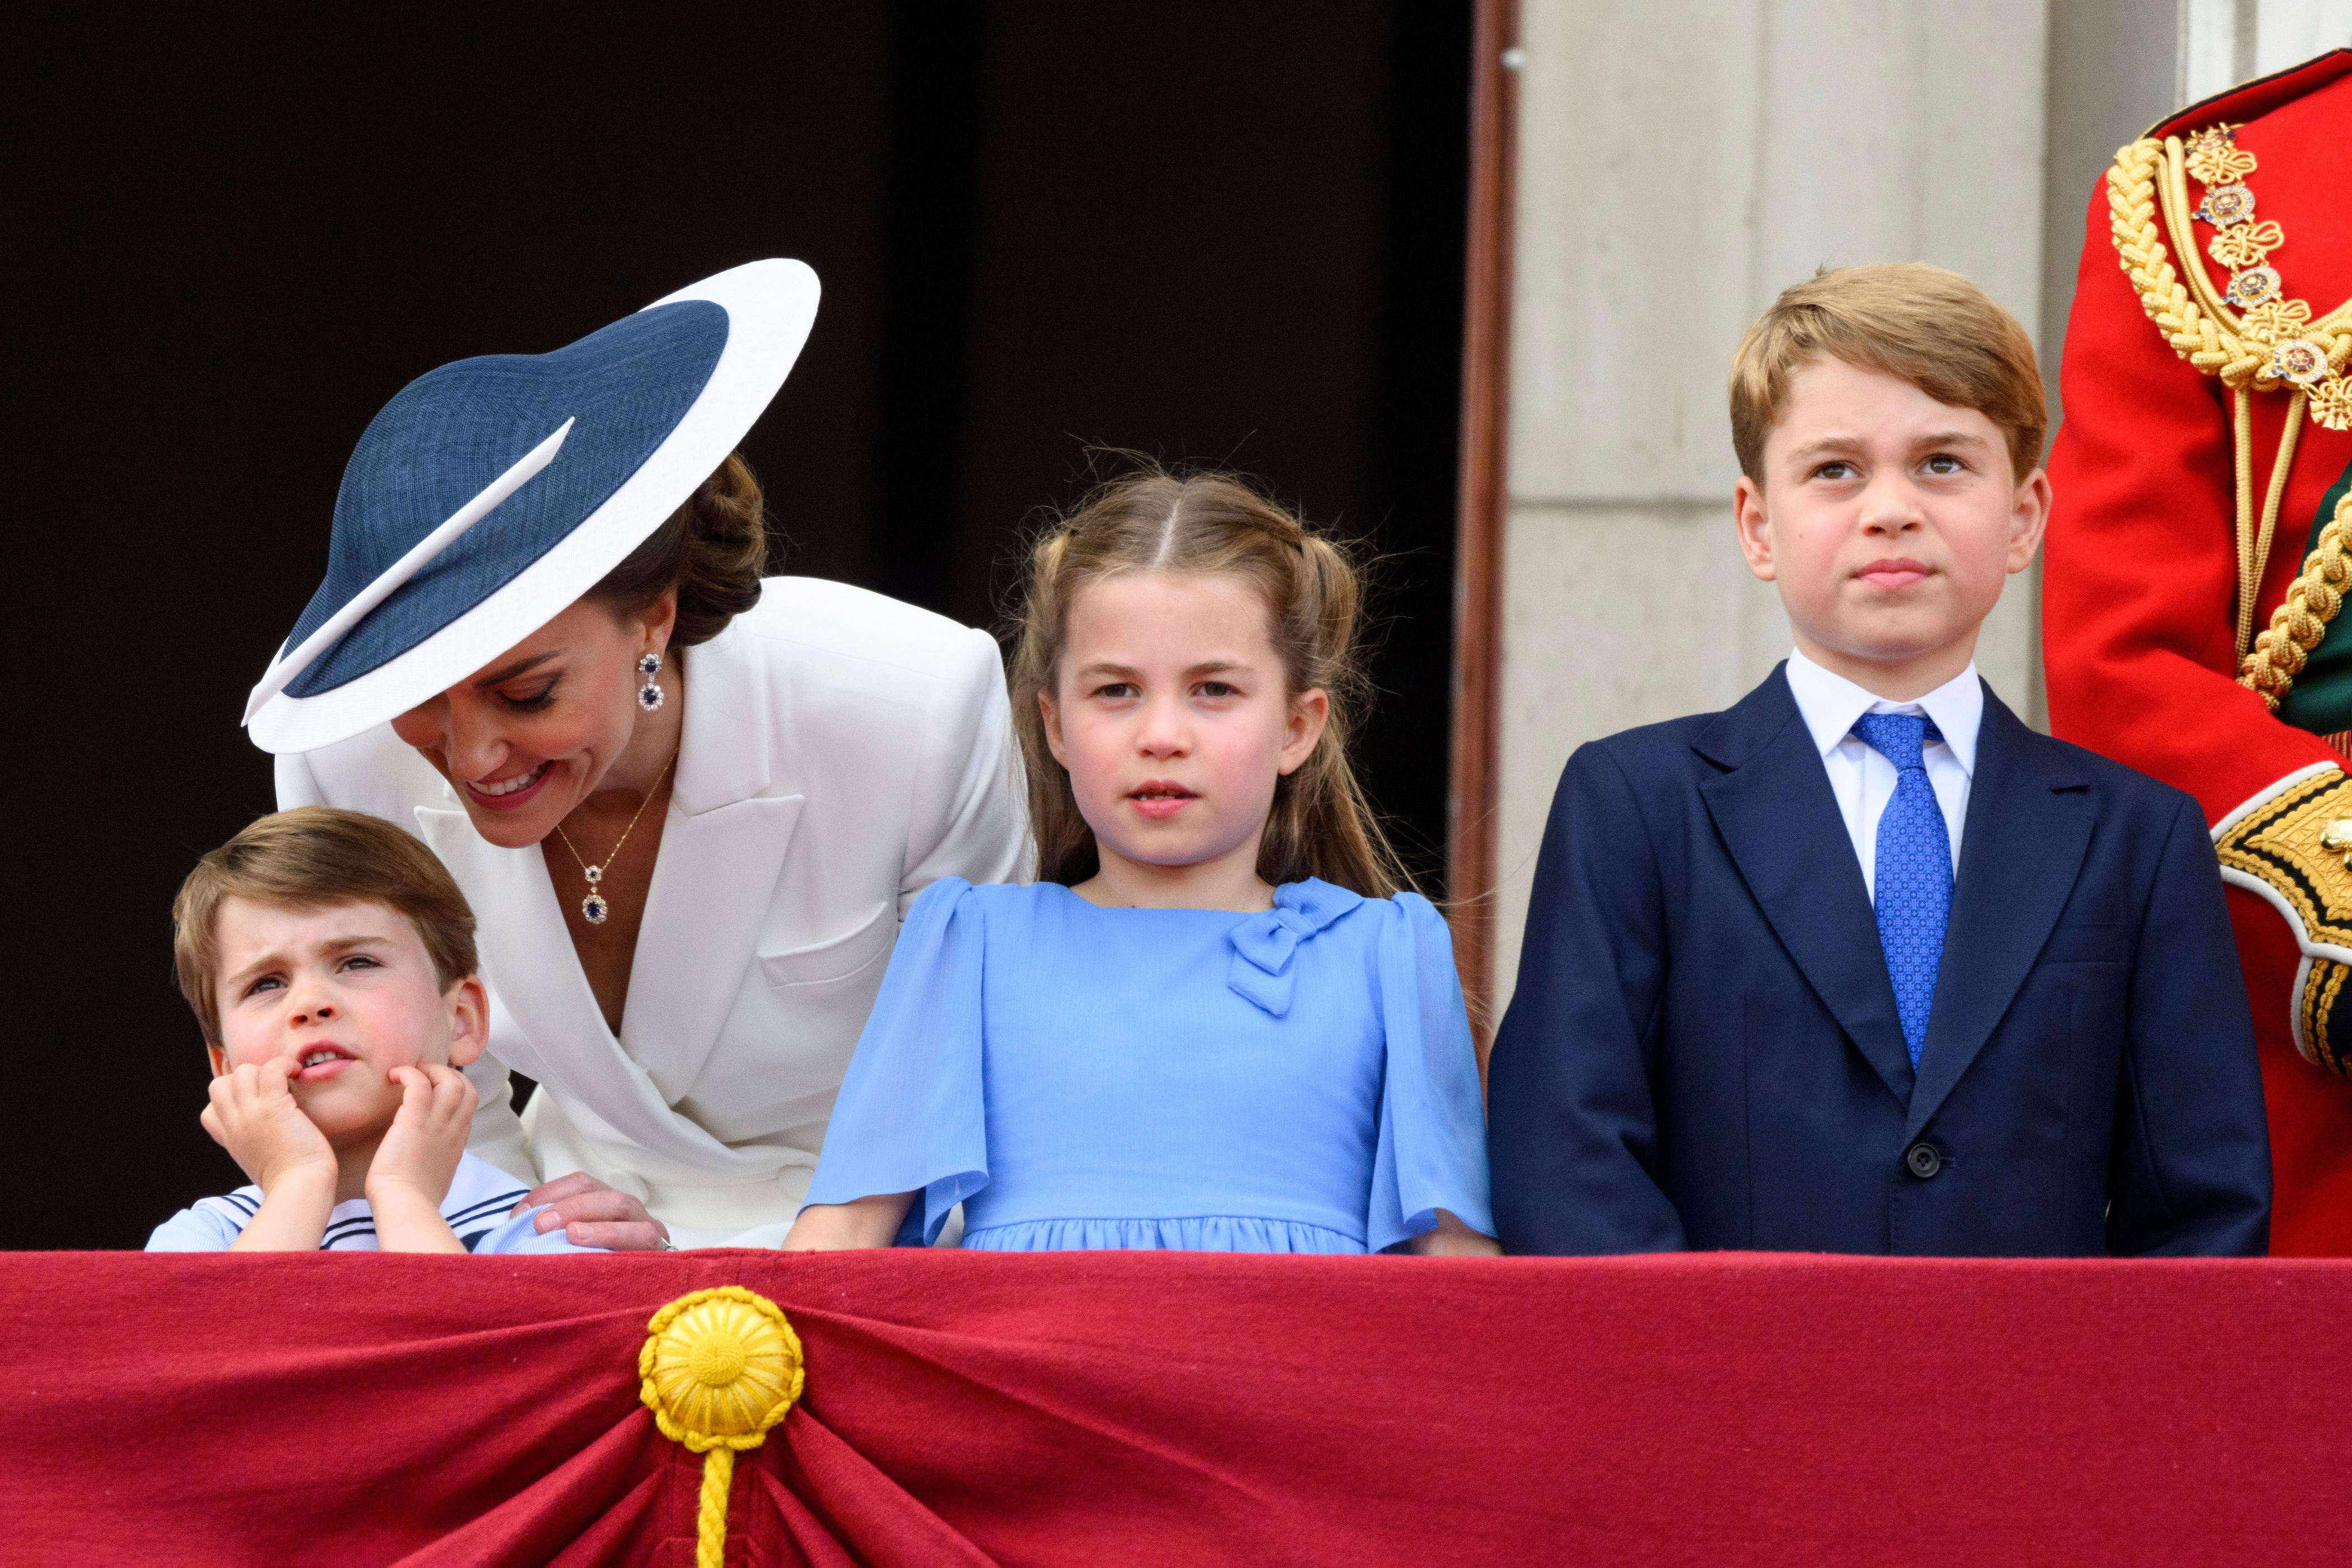 <p>Prince Louis of Cambridge, <a href="https://www.wonderwall.com/celebrity/profiles/overview/duchess-kate-1356.article">Duchess Kate</a>, Princess Charlotte of Cambridge and Prince George of Cambridge watched the <a href="https://www.wonderwall.com/celebrity/royals/trooping-the-colour-2022-see-all-the-best-photos-of-the-cambridge-kids-duchess-kate-and-more-royals-amid-the-queens-platinum-jubilee-605764.gallery">Trooping the Colour</a> festivities as Queen Elizabeth II's <a href="https://www.wonderwall.com/celebrity/royals/platinum-jubilee-see-the-best-photos-from-4-days-of-celebrations-marking-the-queens-70-year-reign-606239.gallery">Platinum Jubilee celebrations</a> kicked off on June 2, 2022.</p>